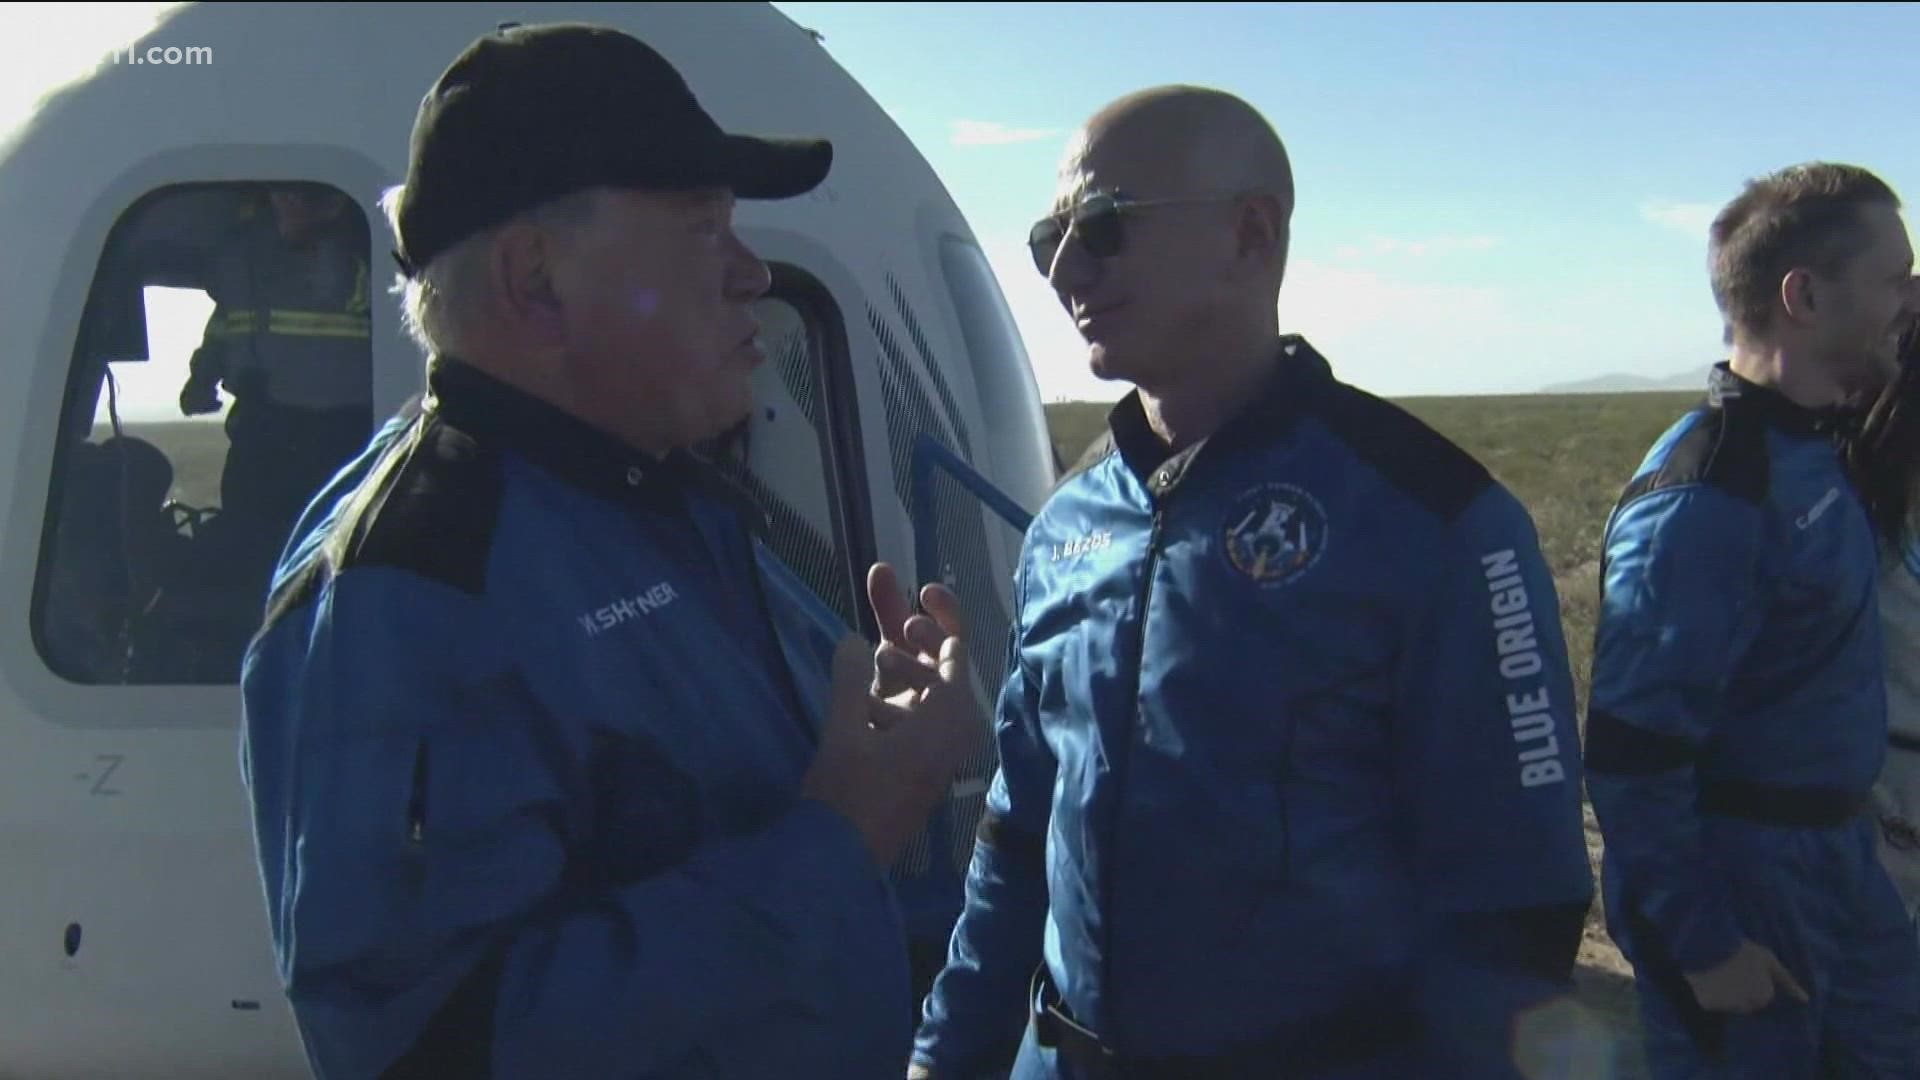 After spending a brief time on the edge of space, the actor successfully returned yesterday on a Blue Origin flight.